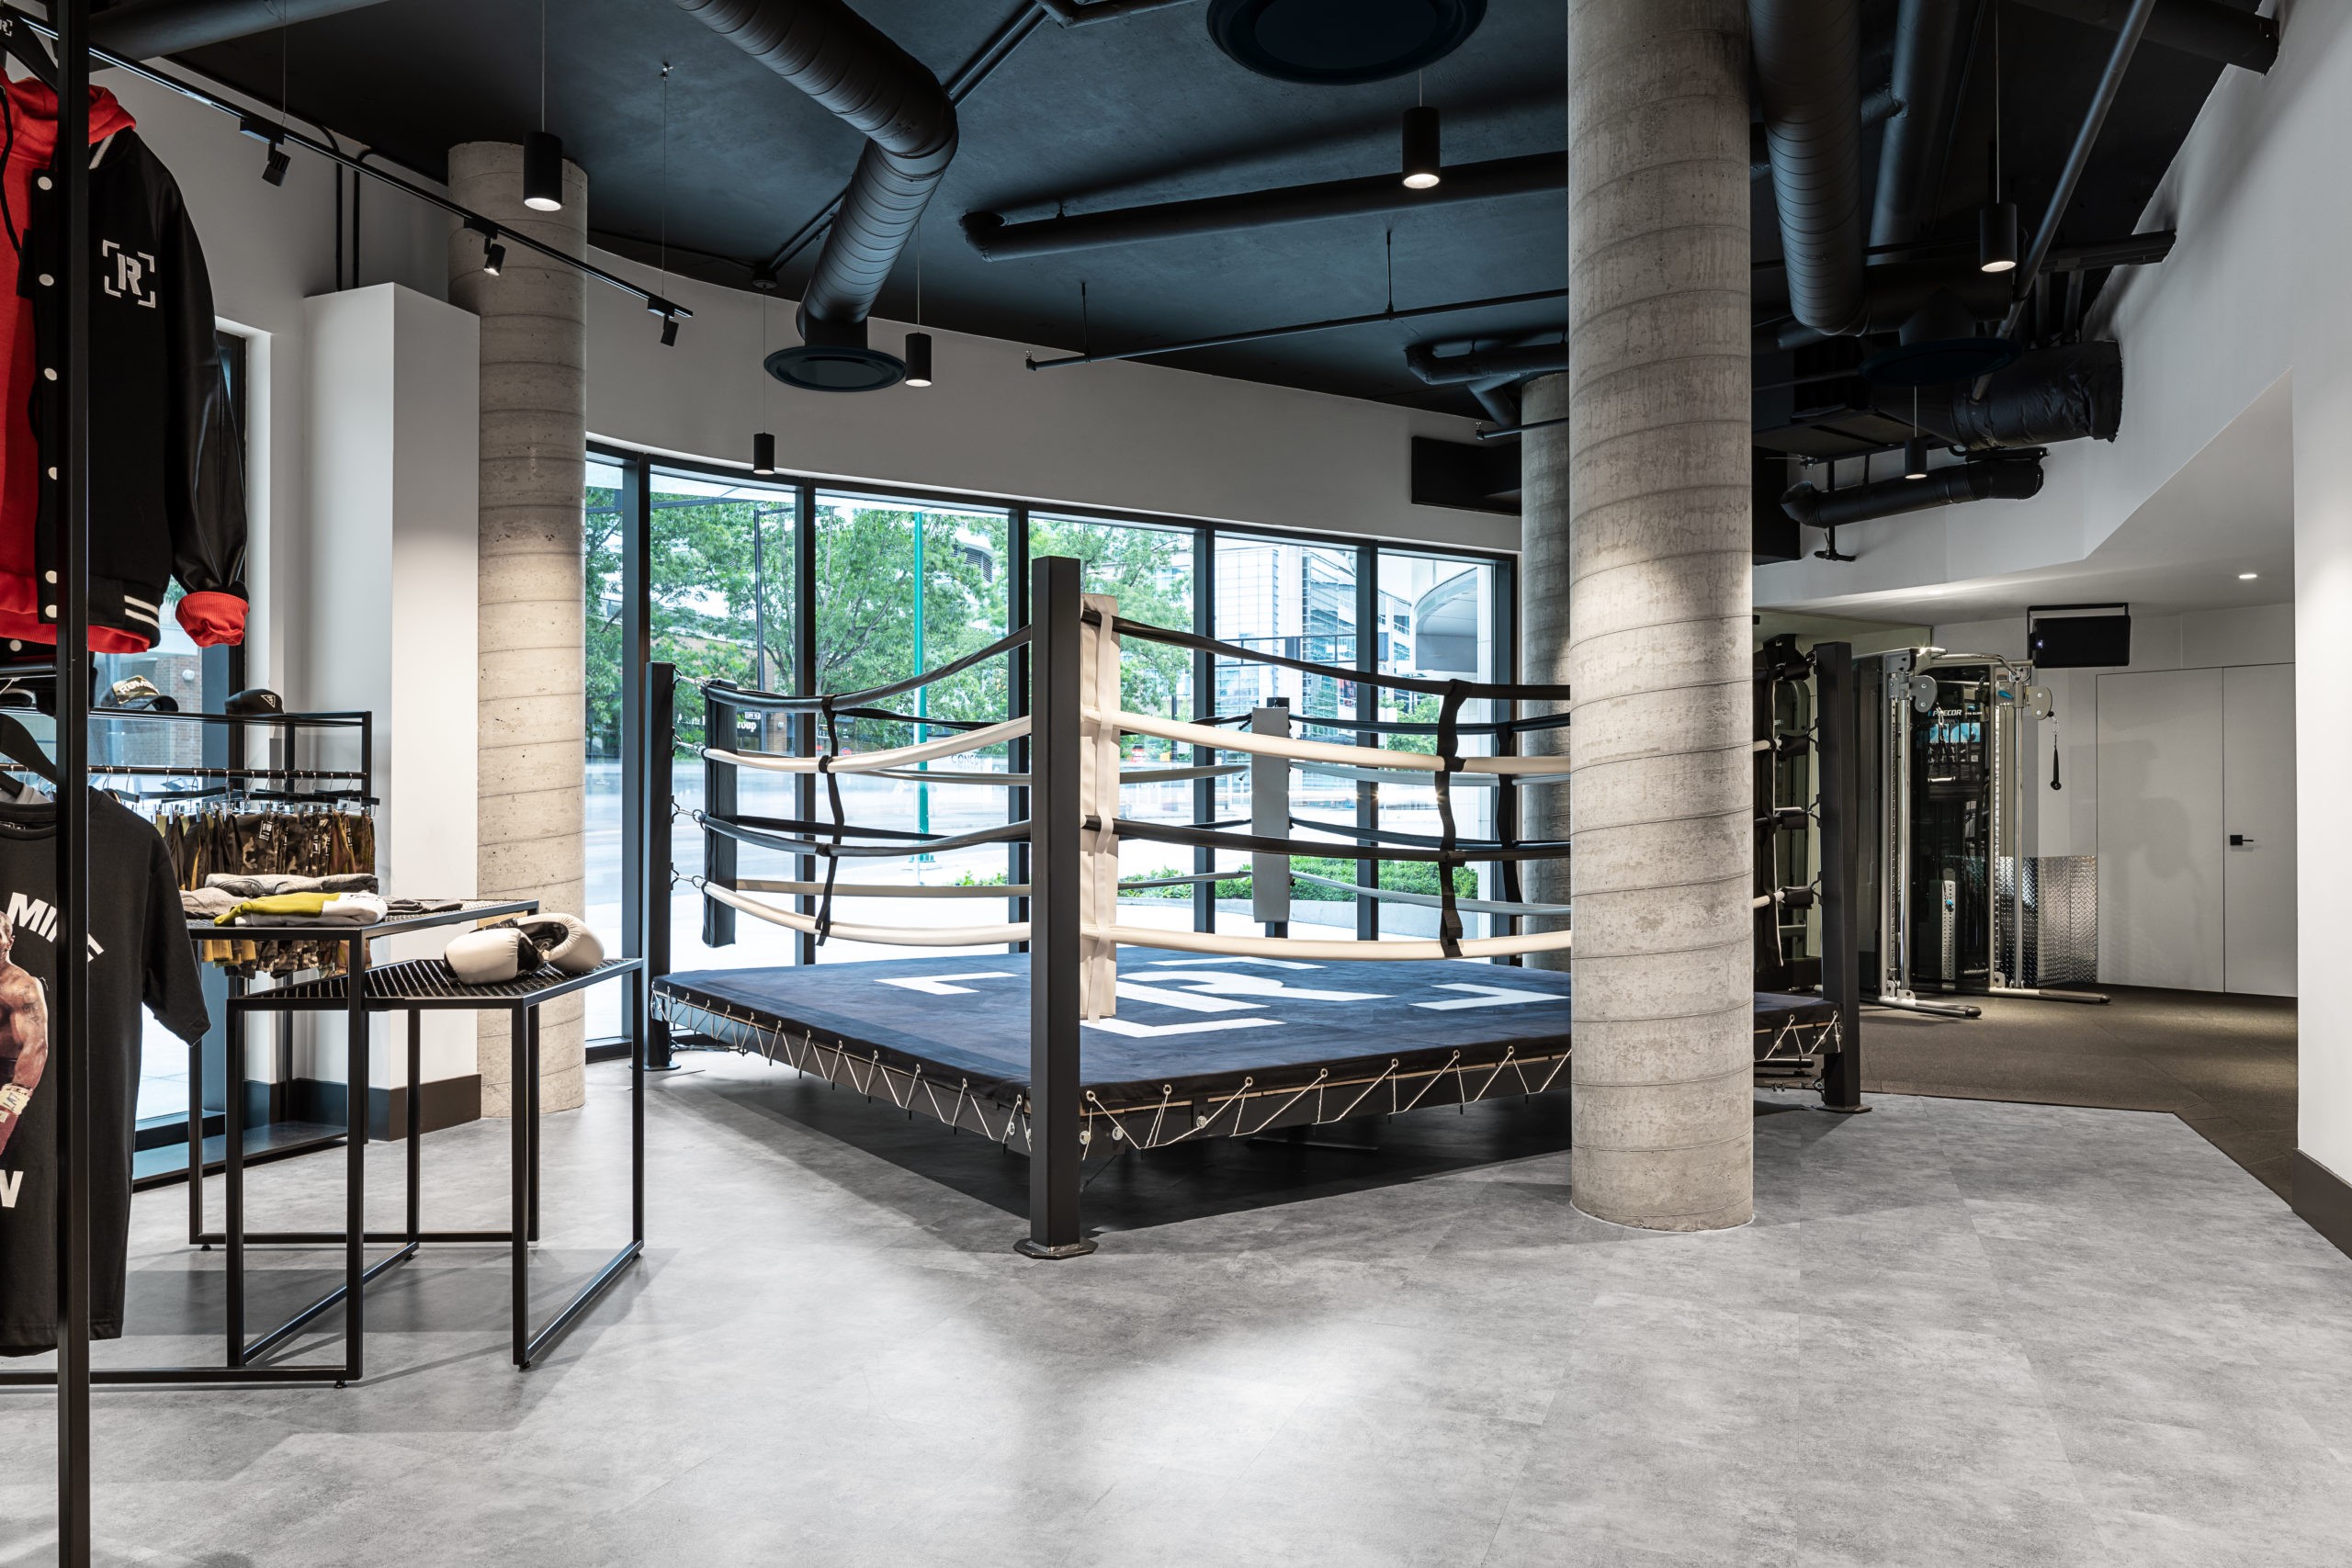 Rumble Boxing Studio in Vancouver  BC Fitness & Gym Design Boxing ring design and interior by Cutler